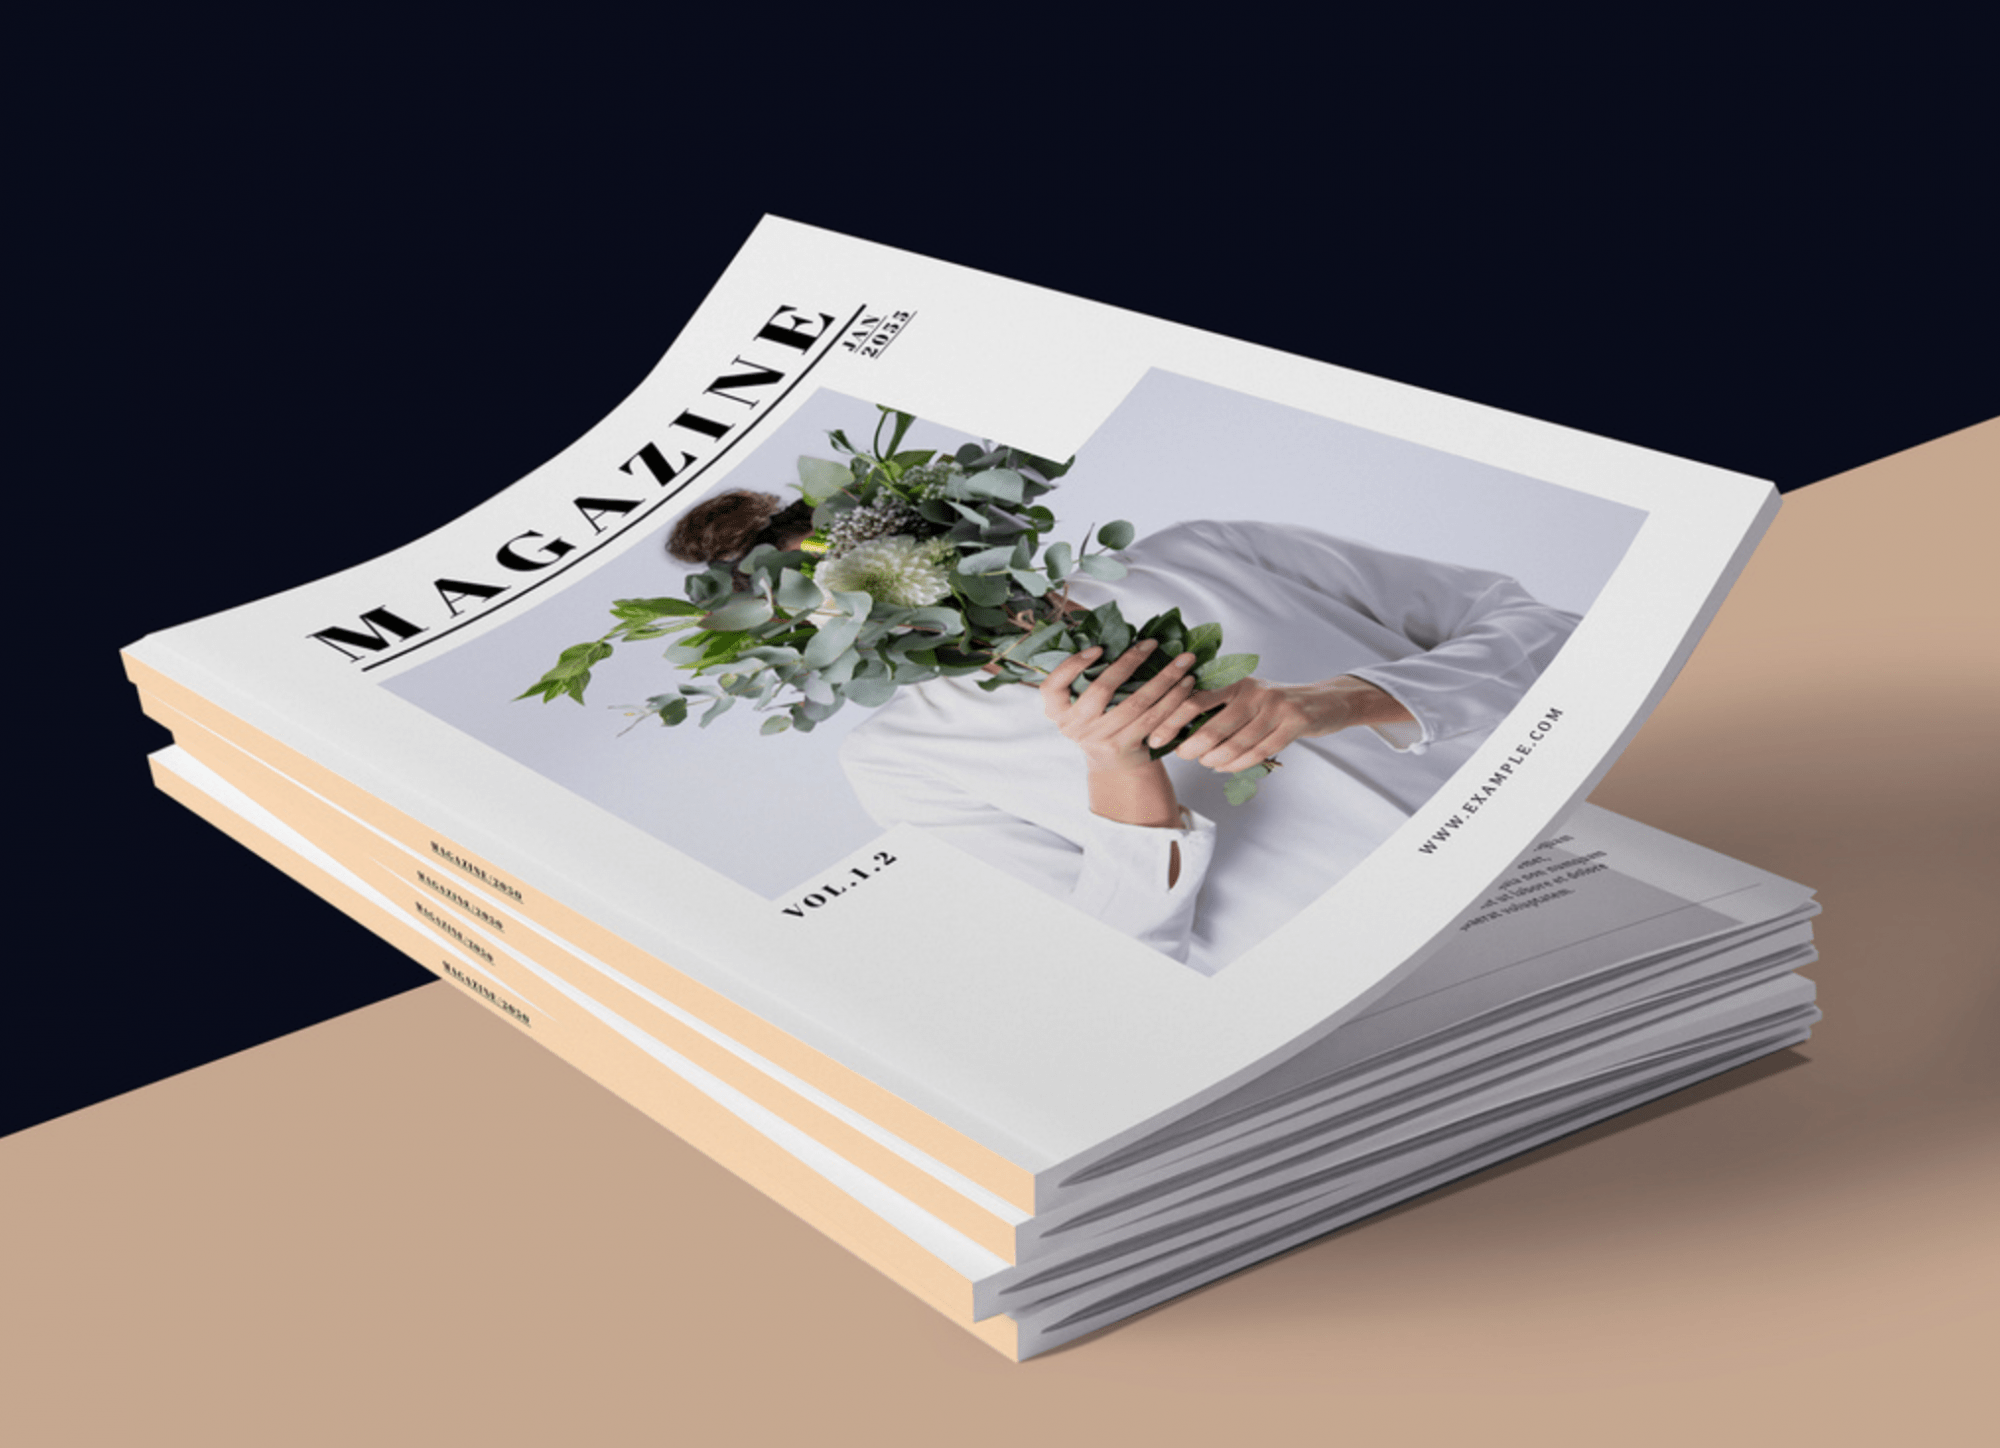 Free Floral Magazine Mockup featuring a high-resolution magazine design